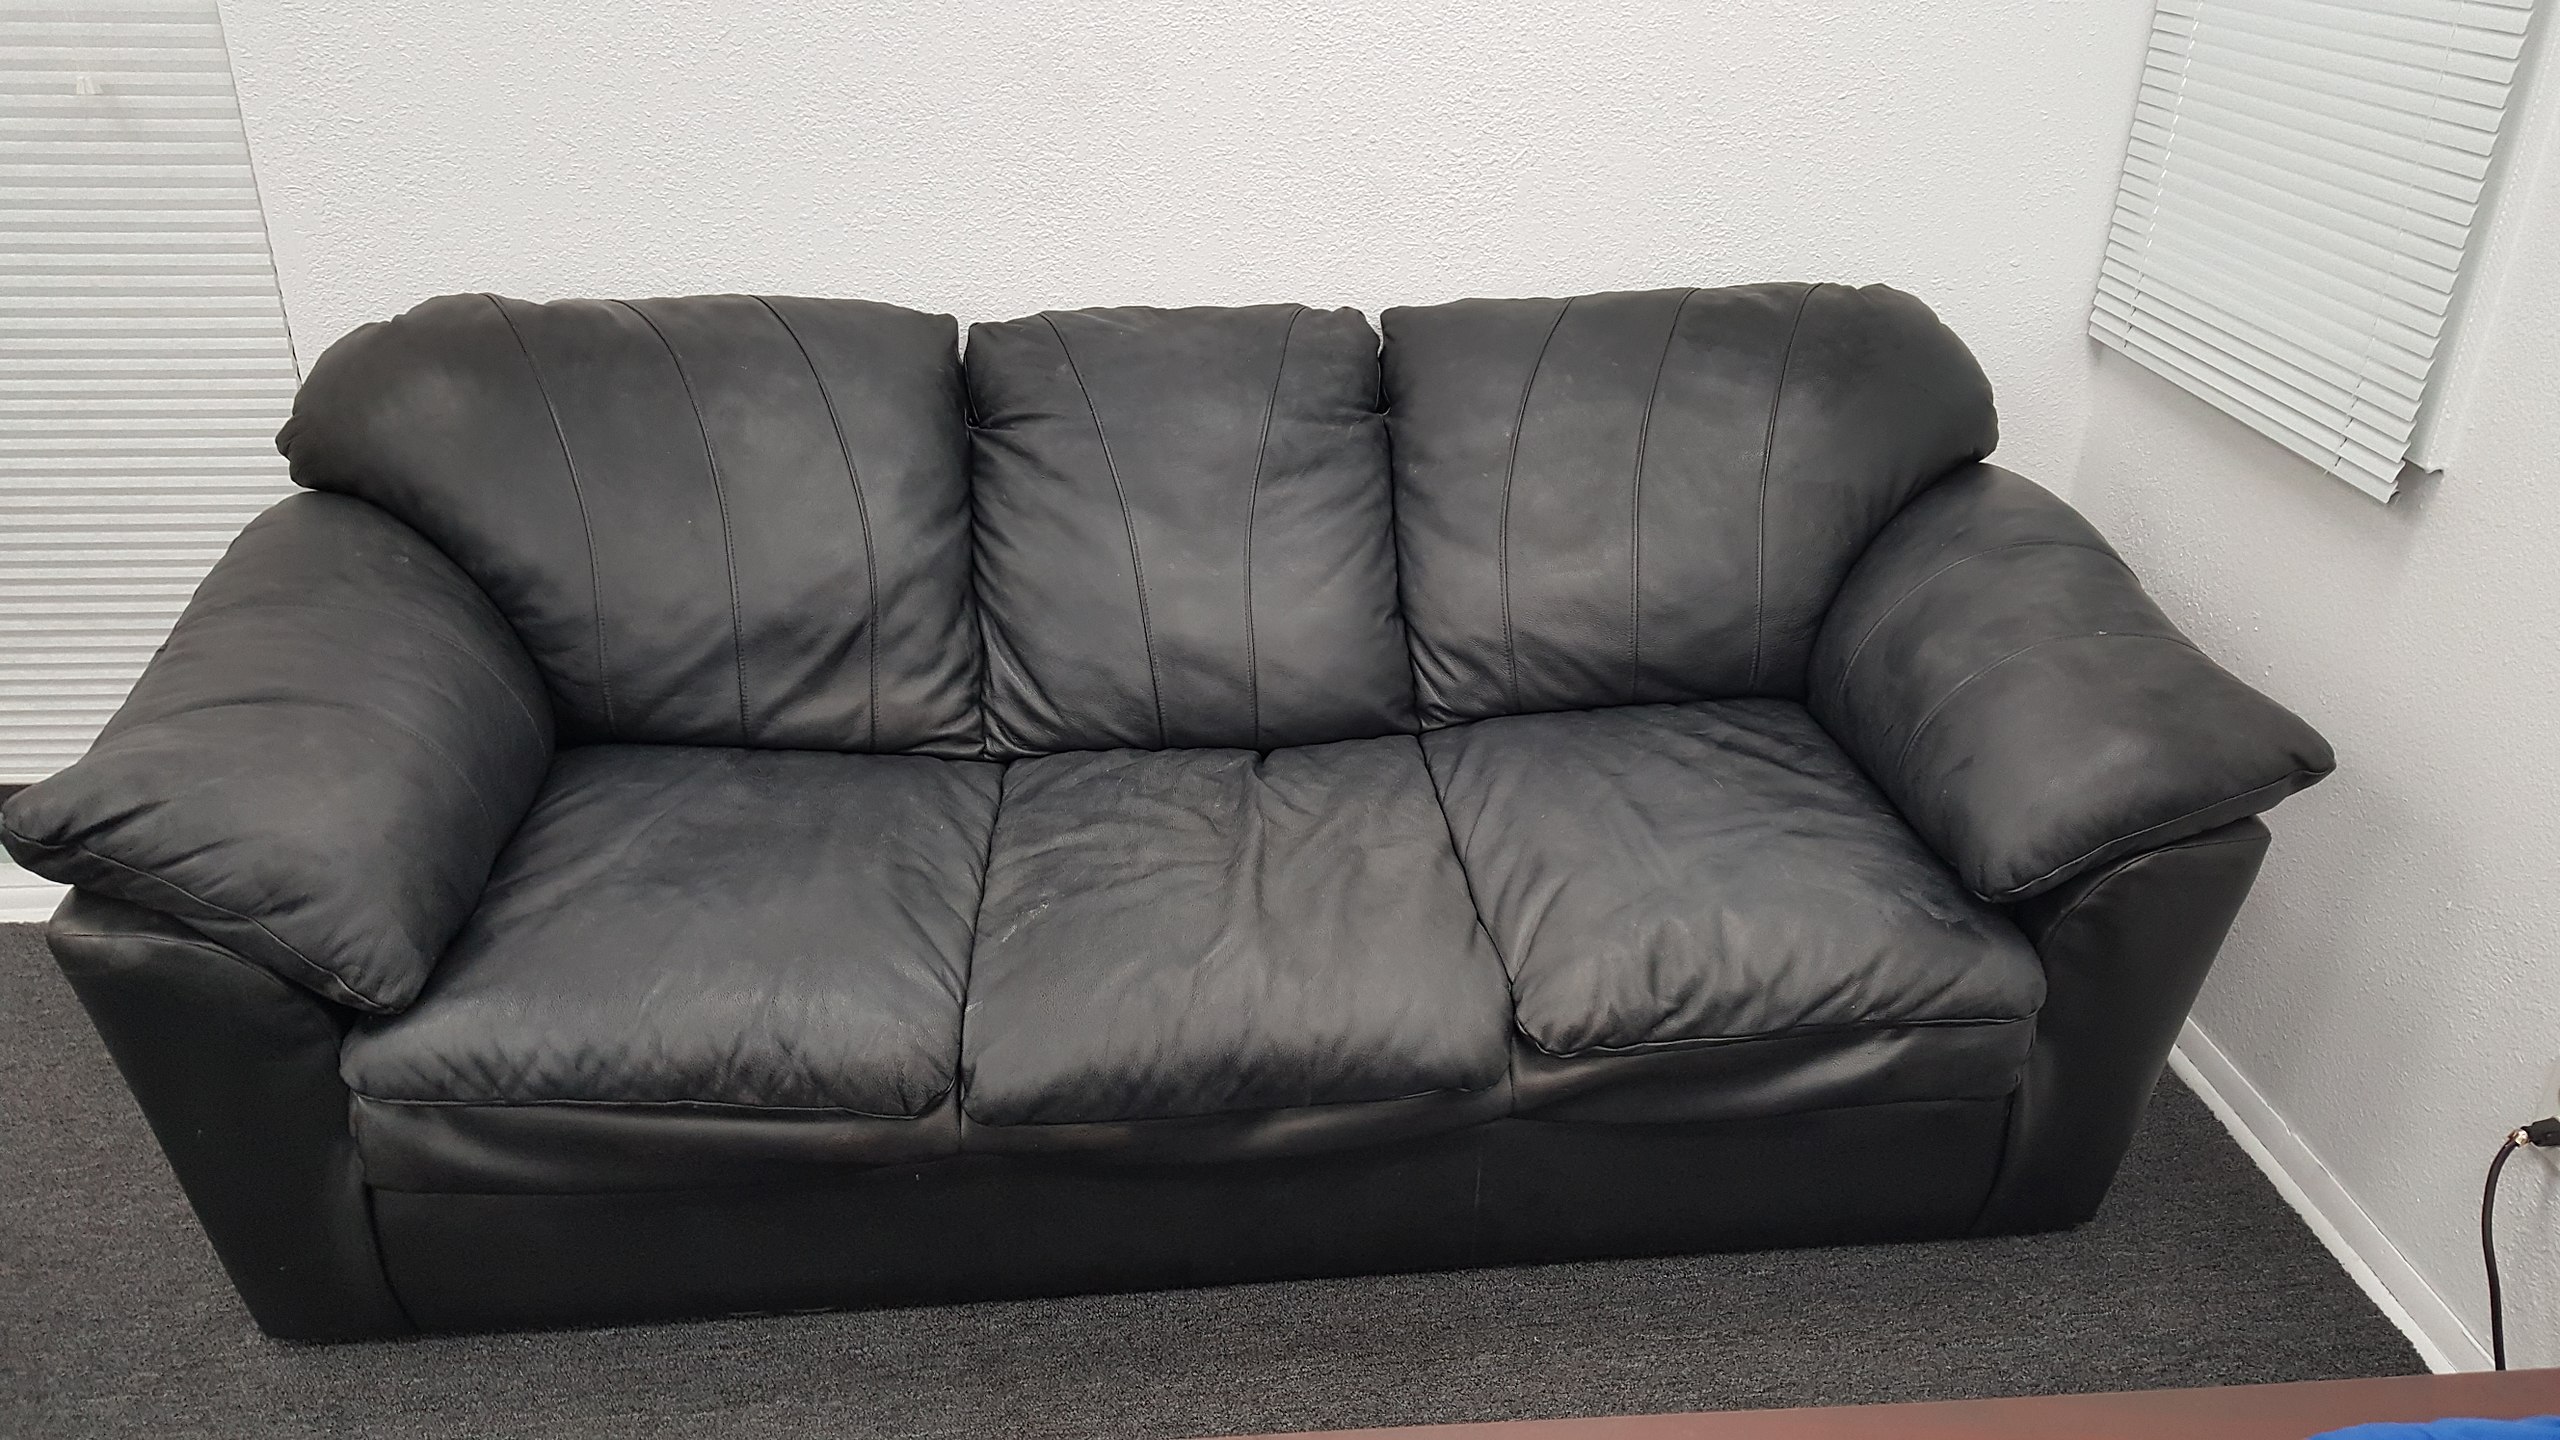 Best Backroom Casting Couch baa ce